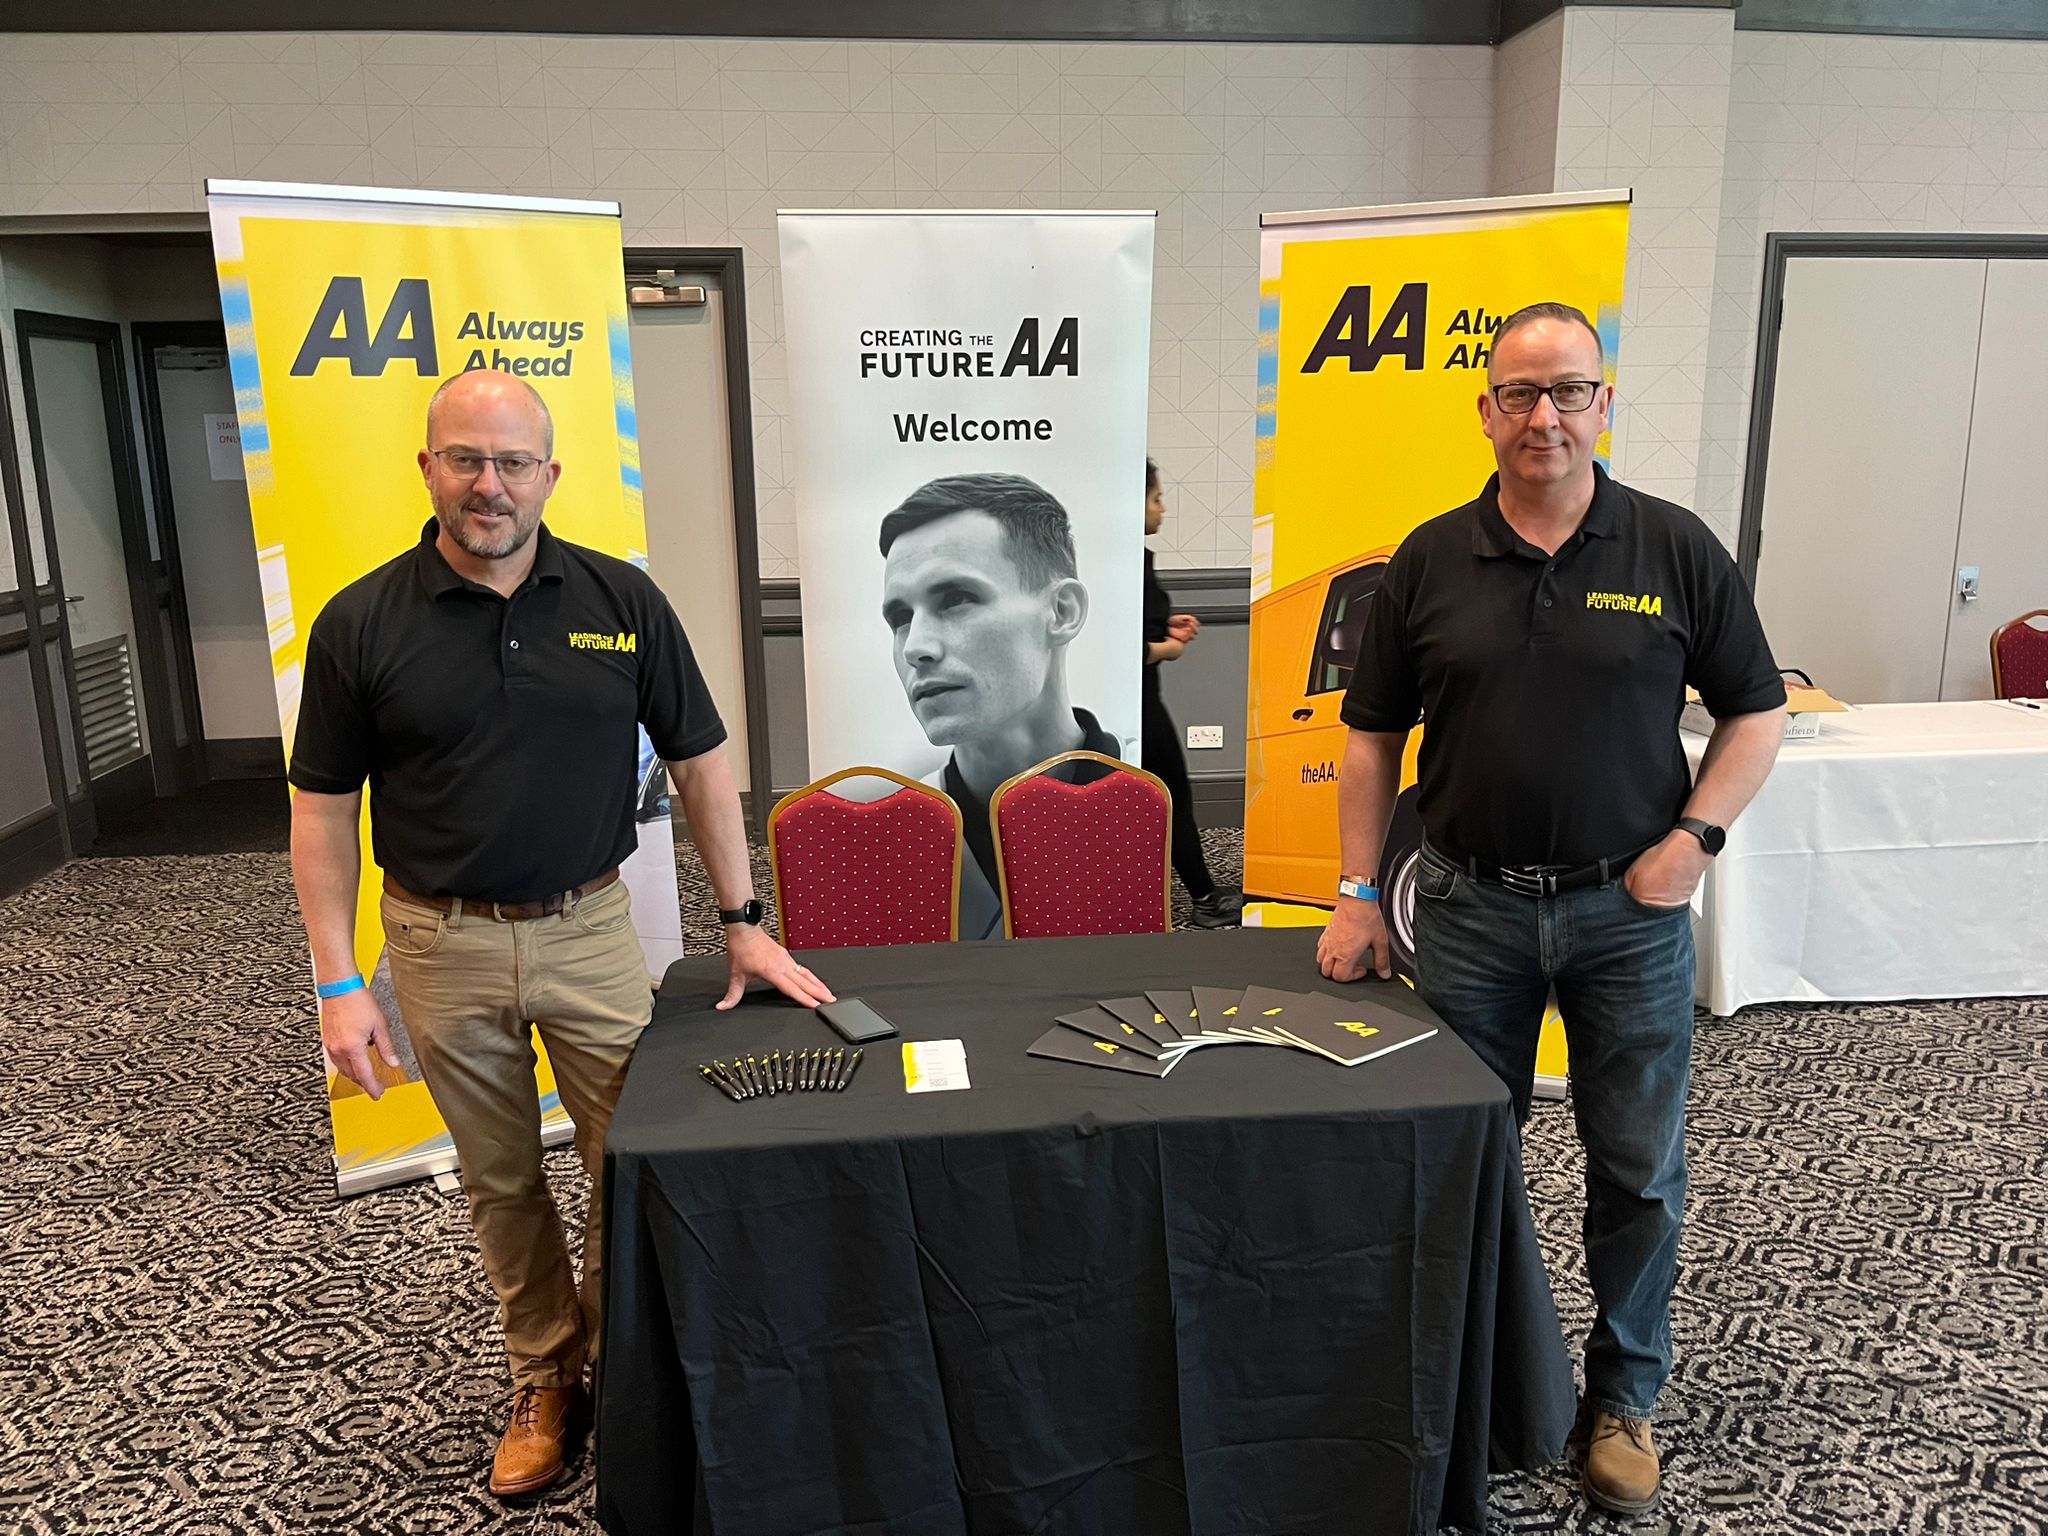 The AA at our event in Luton